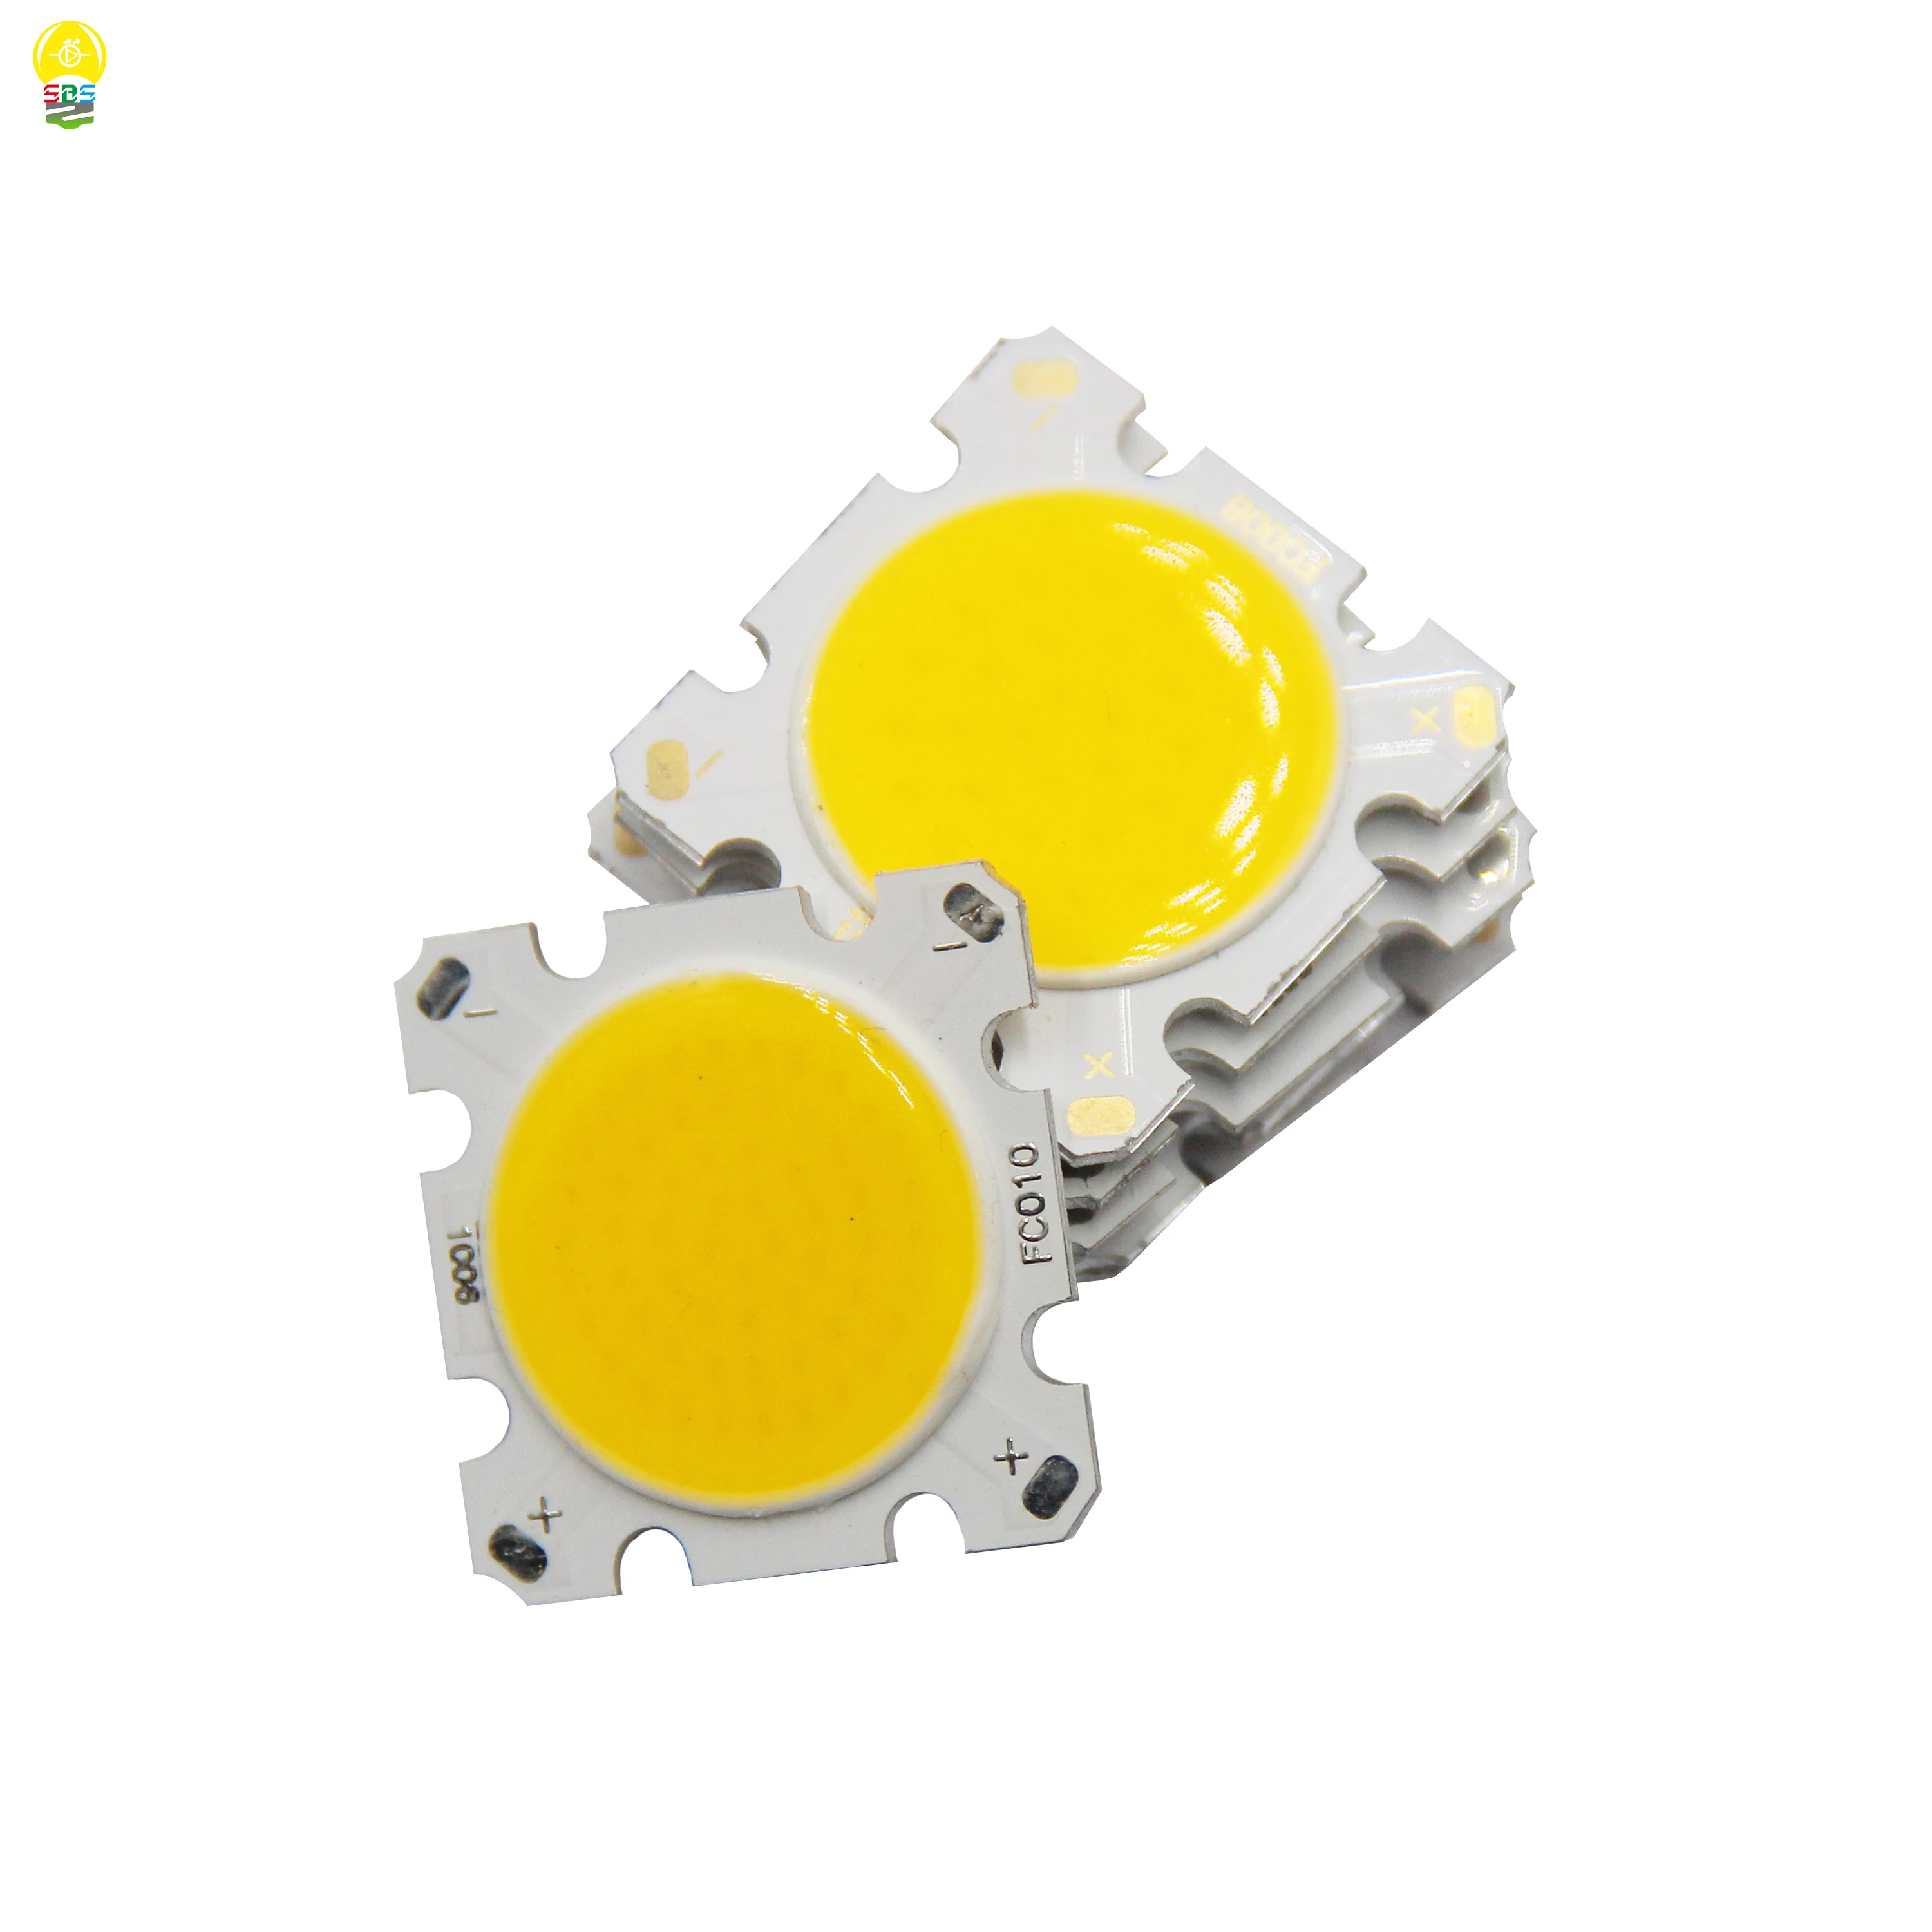 

28x28mm High Power LED COB Light Source 30W 15W Warm Cold Nature White for OutdoorIndoor Downlight Rail Lighting Ceiling Lamp